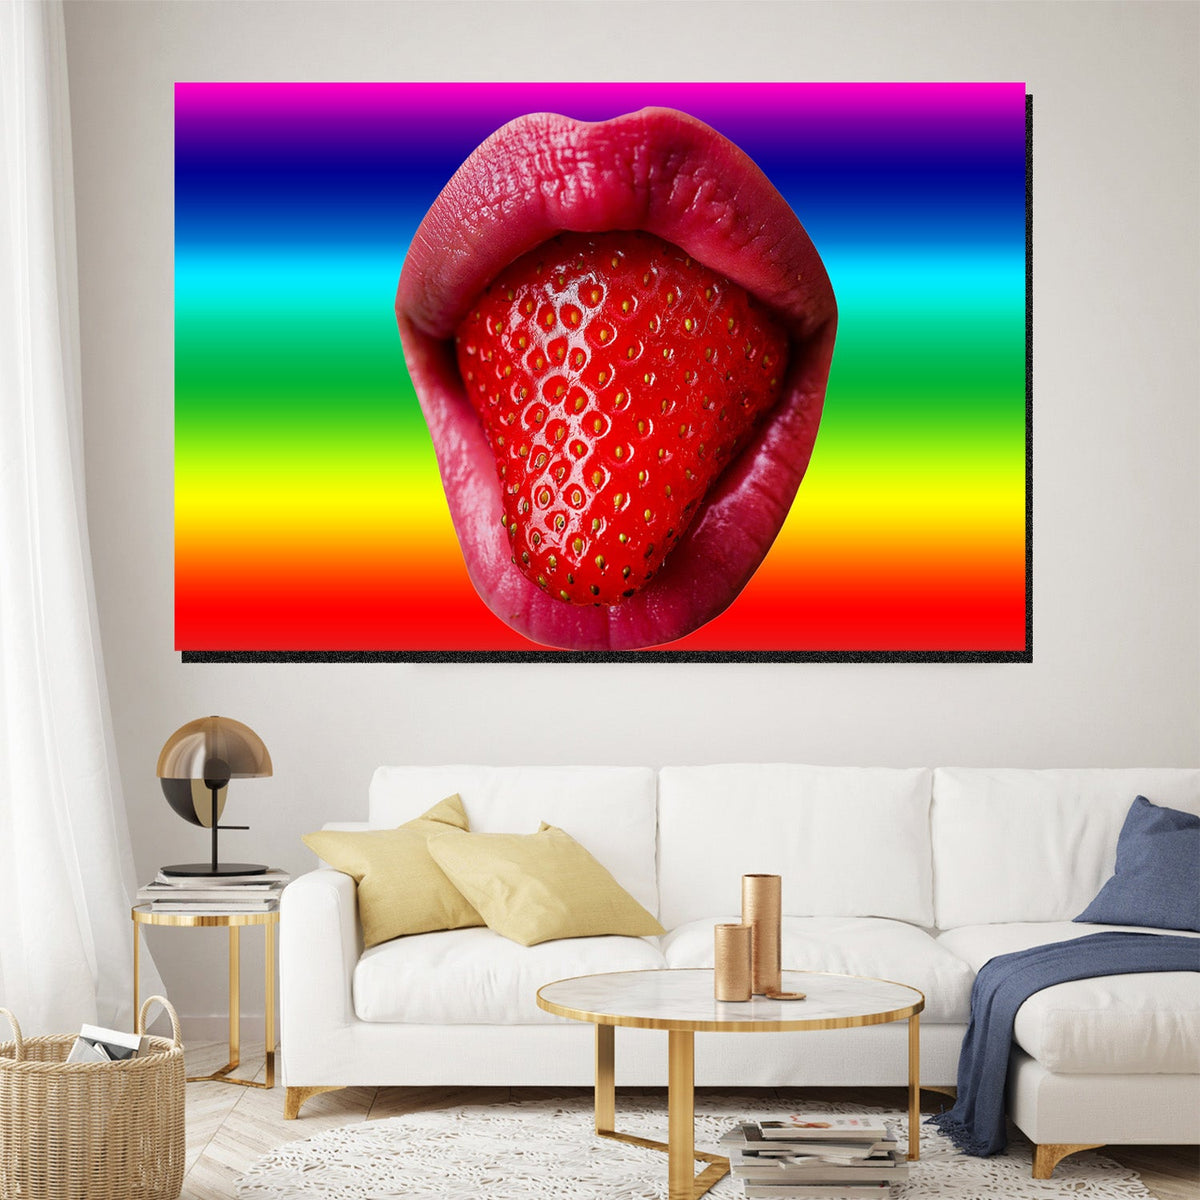 https://cdn.shopify.com/s/files/1/0387/9986/8044/products/MouthfulofStrawberryCanvasArtprintStretched-4.jpg